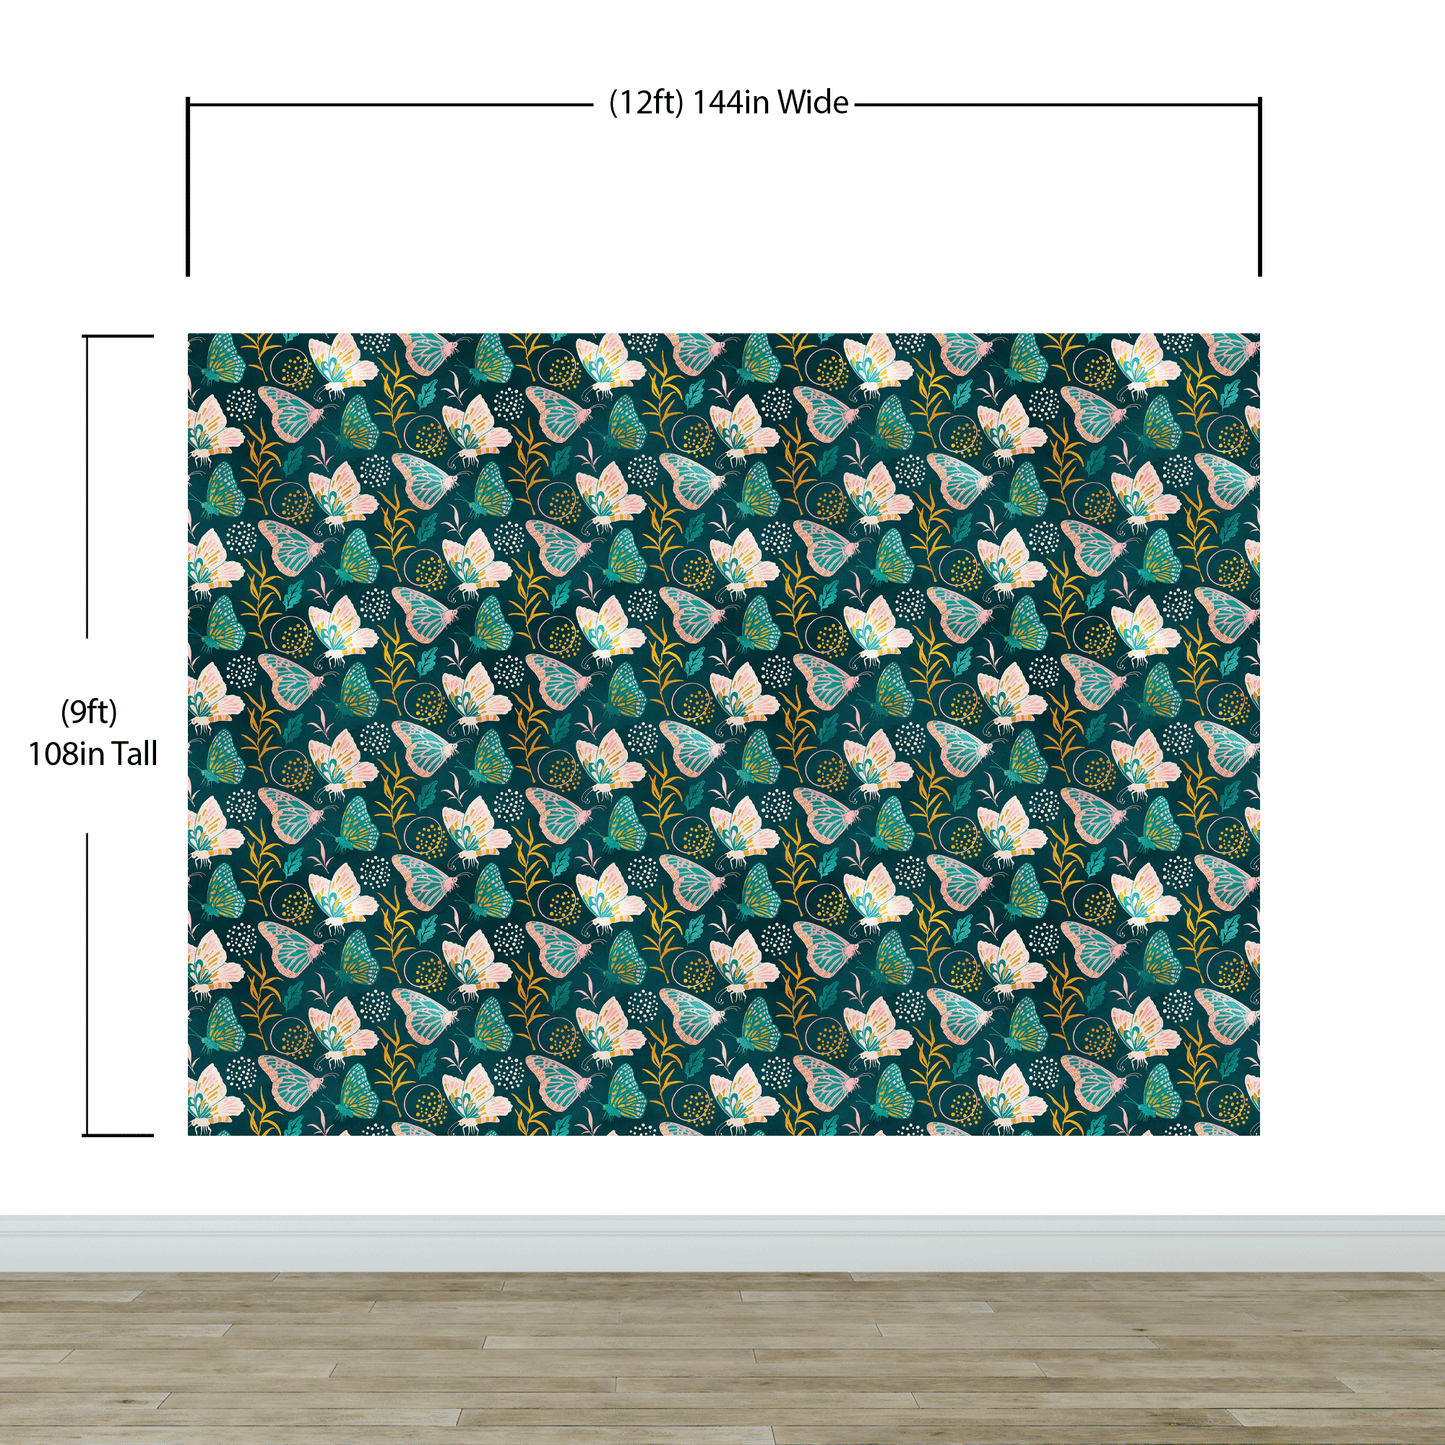 Butterfly Pattern Wall Mural. Retro Green and Gold Color Illustration Design. Bedroom, Nursery, Home Decor. #6435